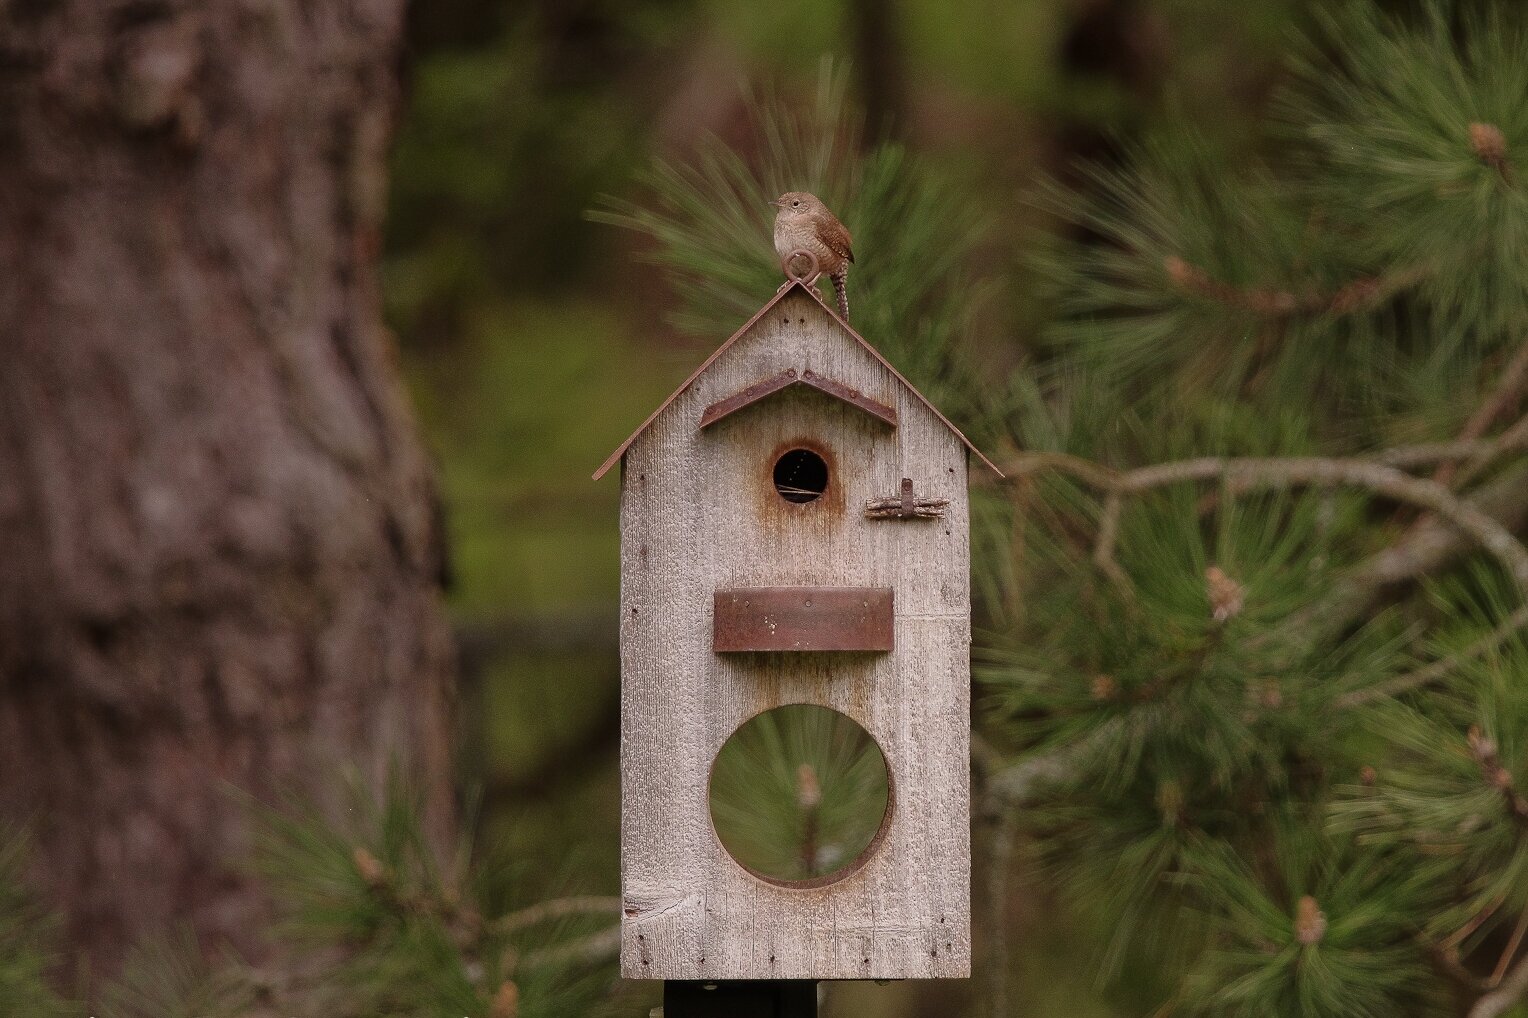 This rustic bird house and feeder fits the woodland theme and provides the ideal home for this Carolina wren.